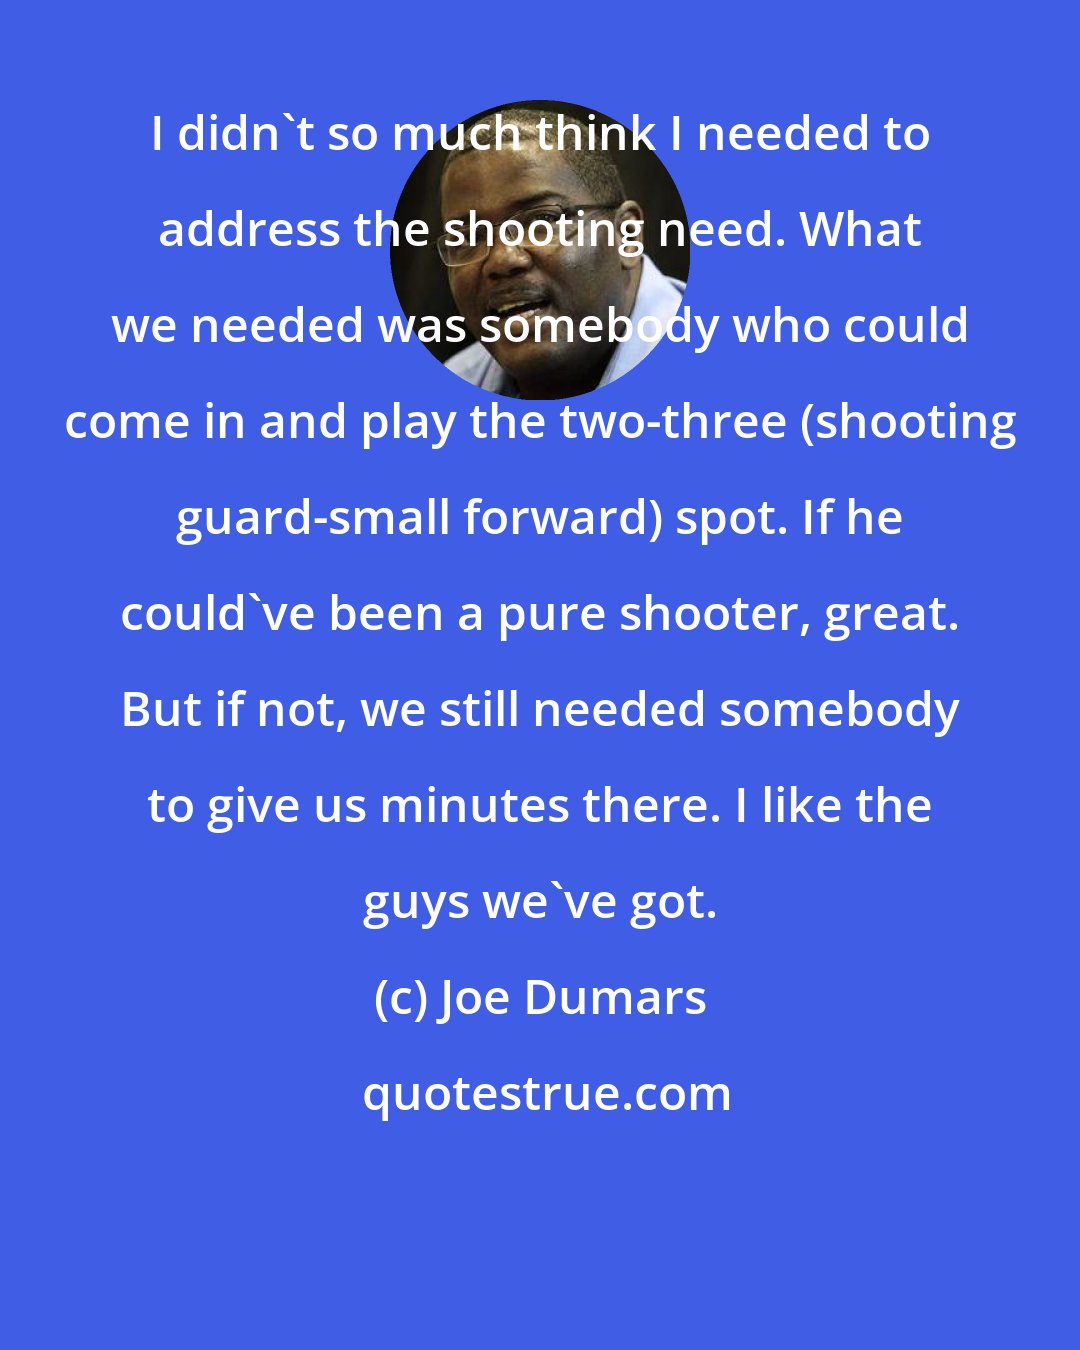 Joe Dumars: I didn't so much think I needed to address the shooting need. What we needed was somebody who could come in and play the two-three (shooting guard-small forward) spot. If he could've been a pure shooter, great. But if not, we still needed somebody to give us minutes there. I like the guys we've got.